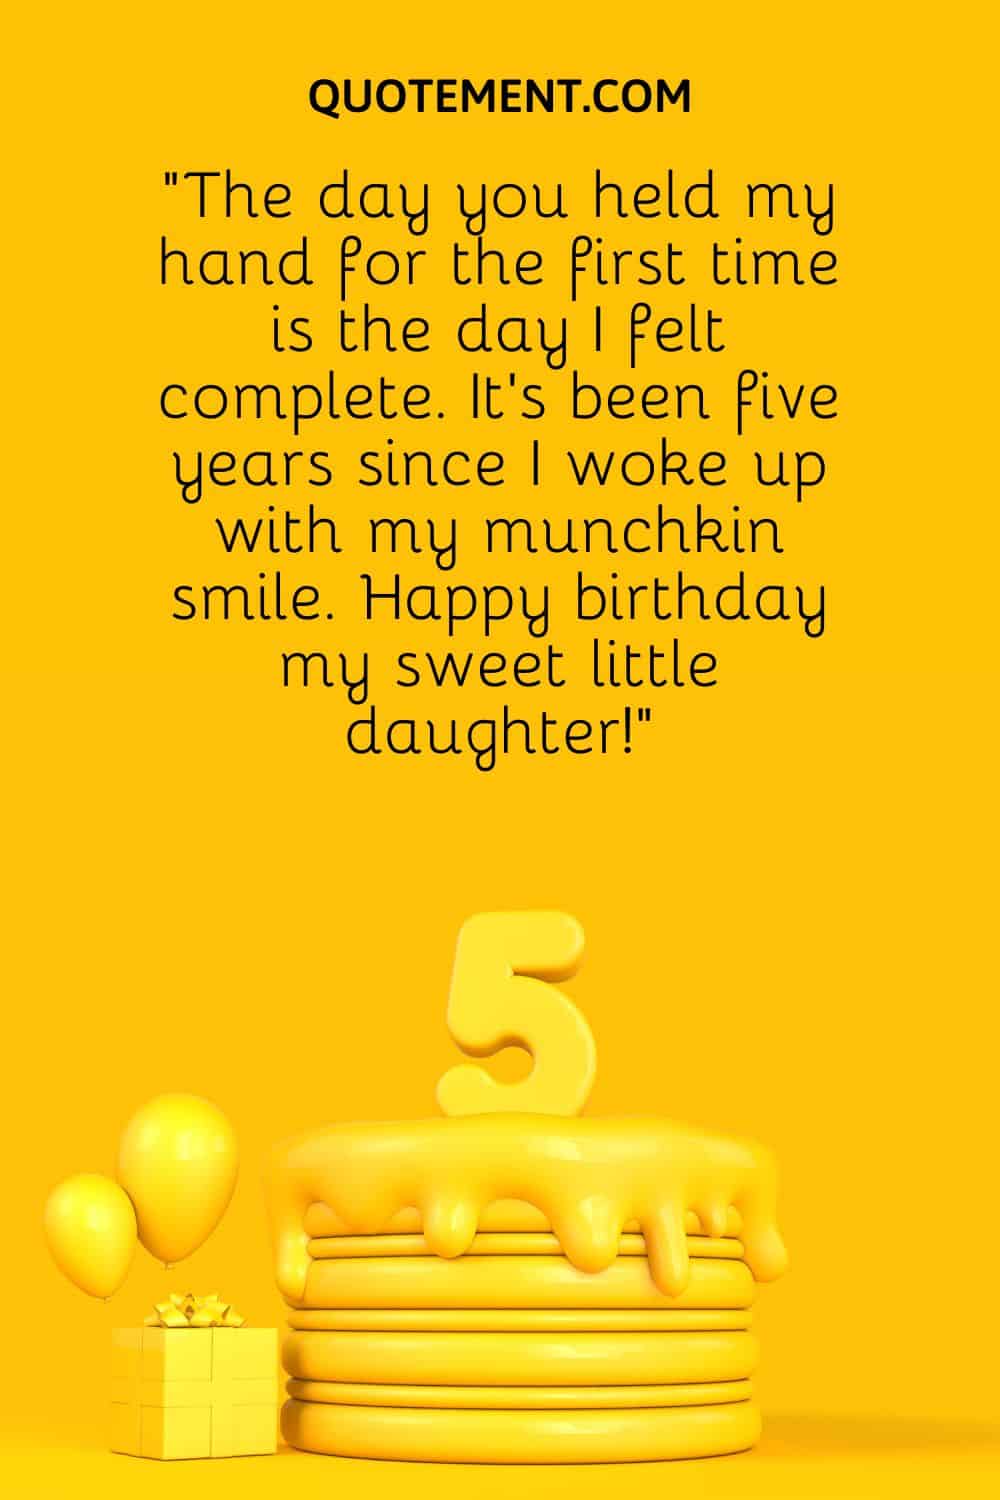 “The day you held my hand for the first time is the day I felt complete. It’s been five years since I woke up with my munchkin smile. Happy birthday my sweet little daughter!”